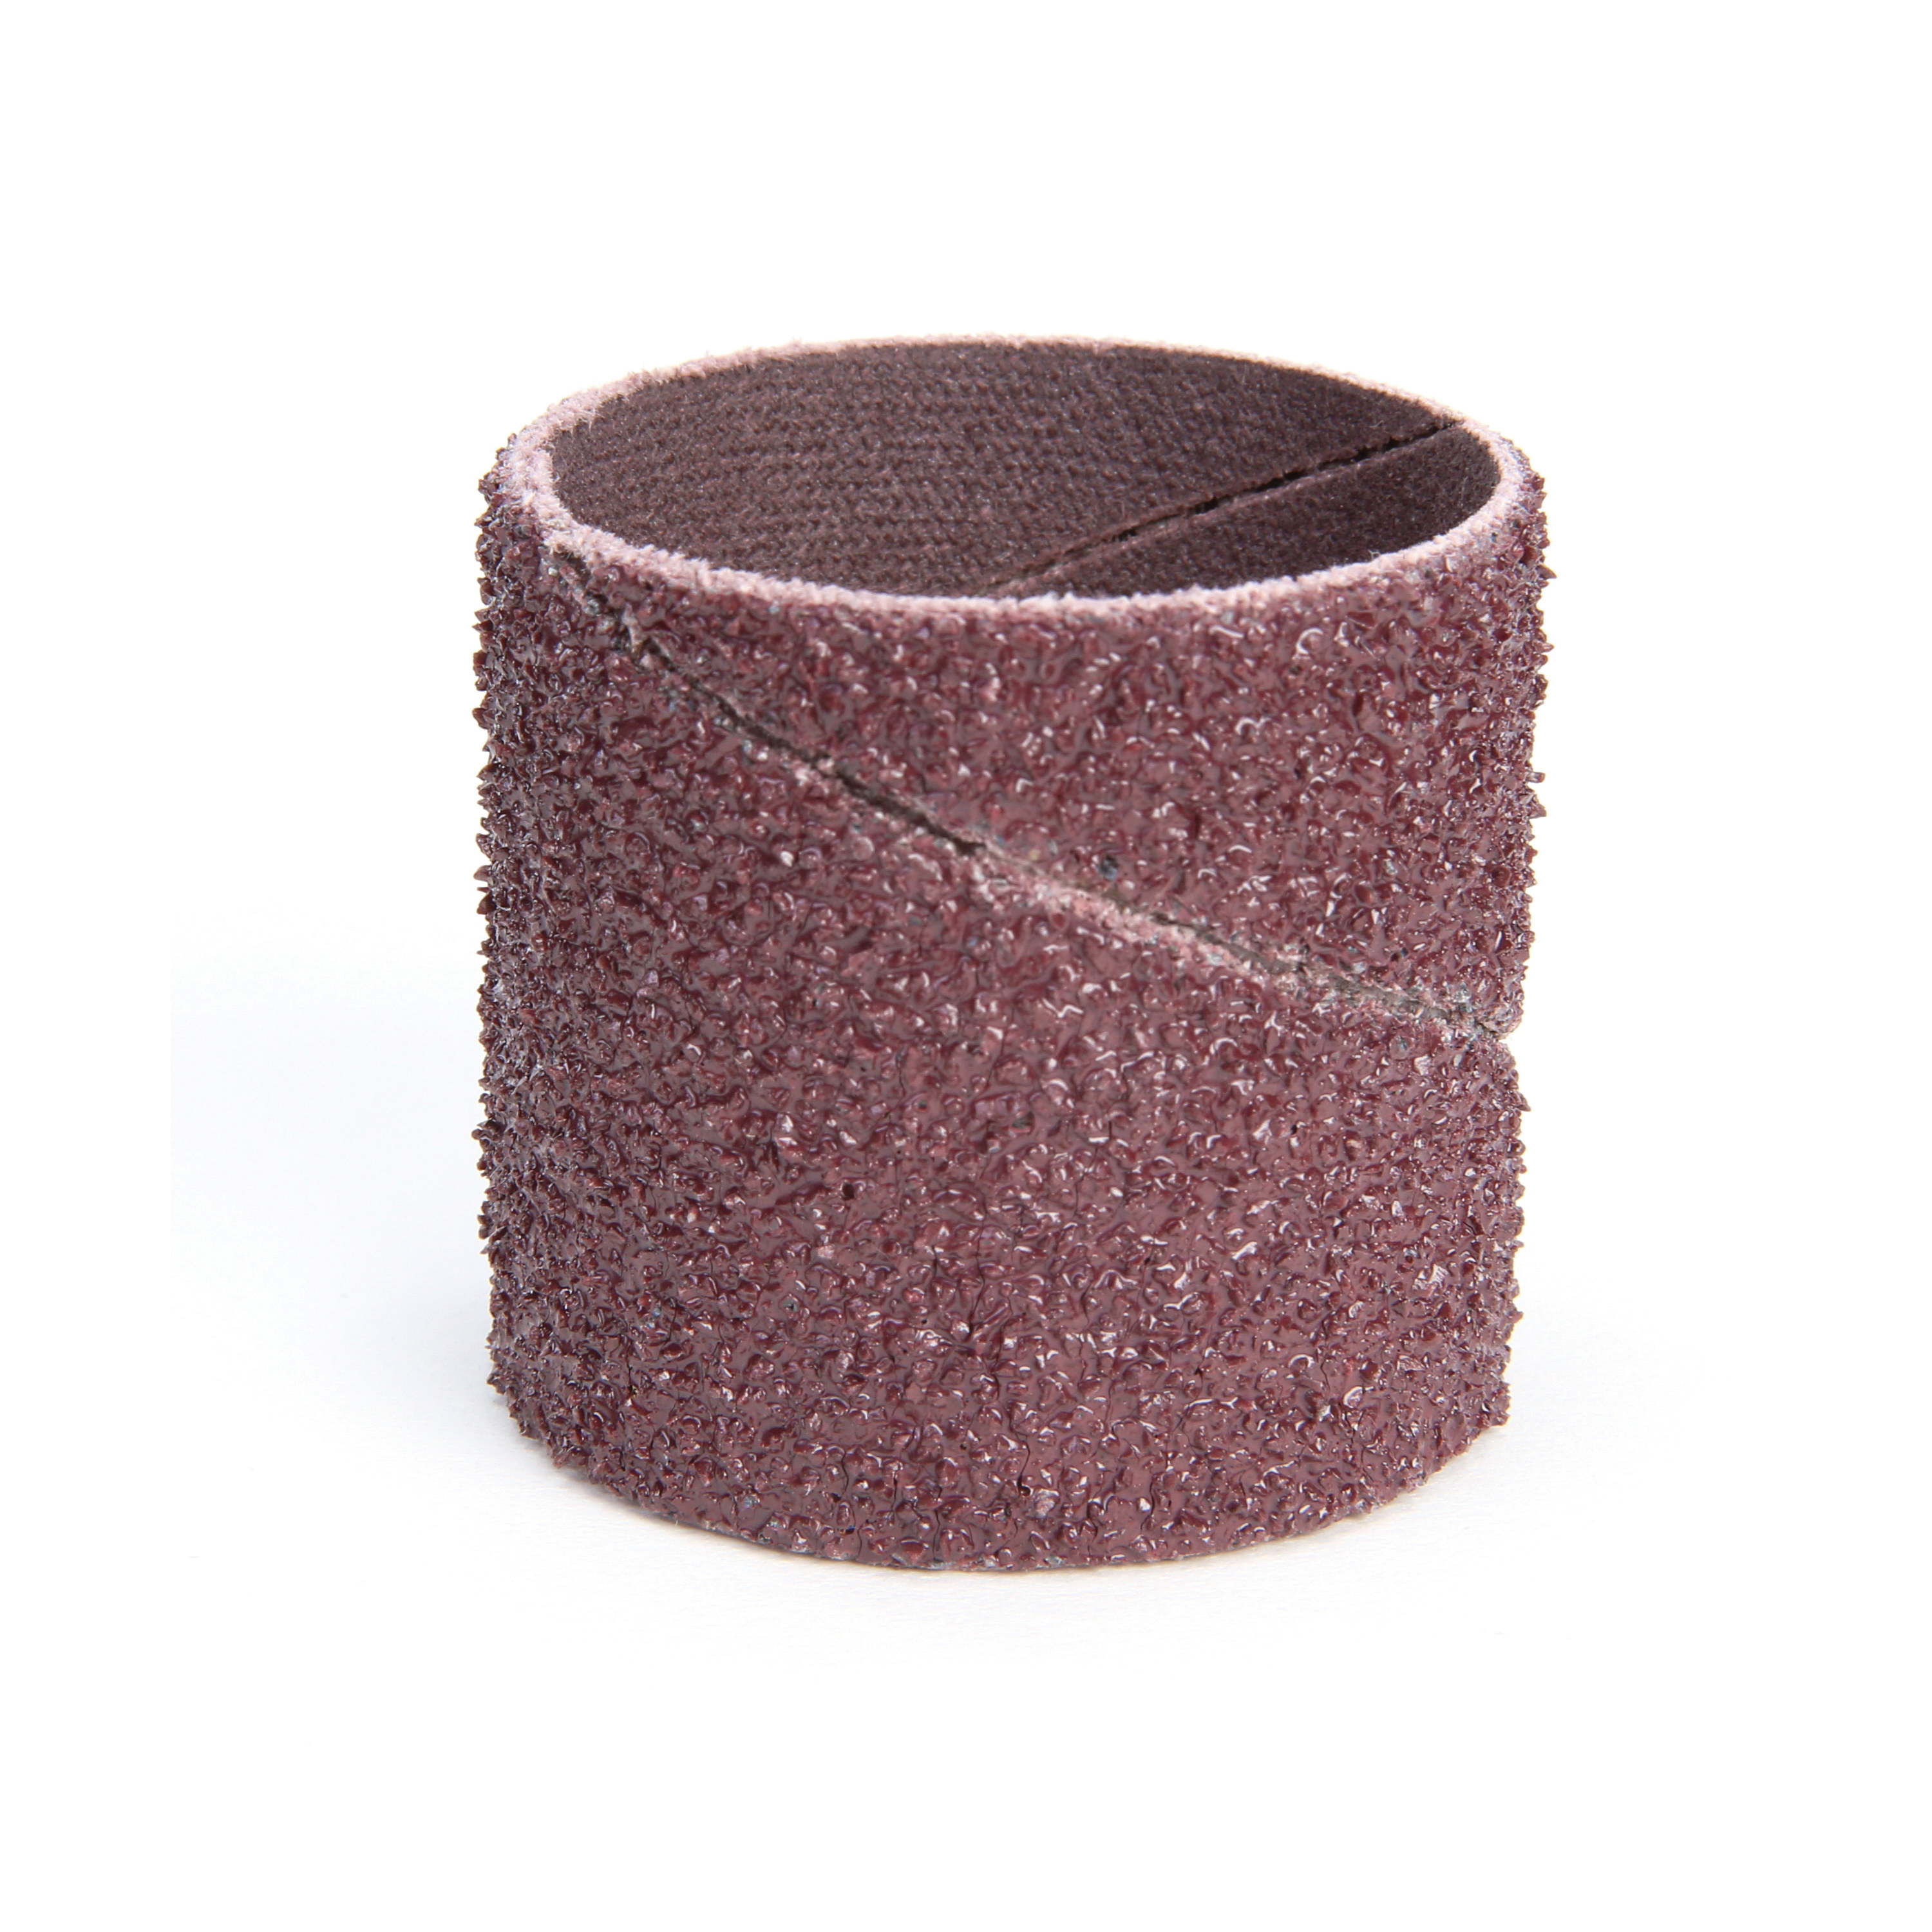 3M™ Evenrun™ 051144-40200 341D Coated Spiral Band, 1-1/2 in Dia x 1-1/2 in L Band, 36 Grit, Very Coarse Grade, Aluminum Oxide Abrasive